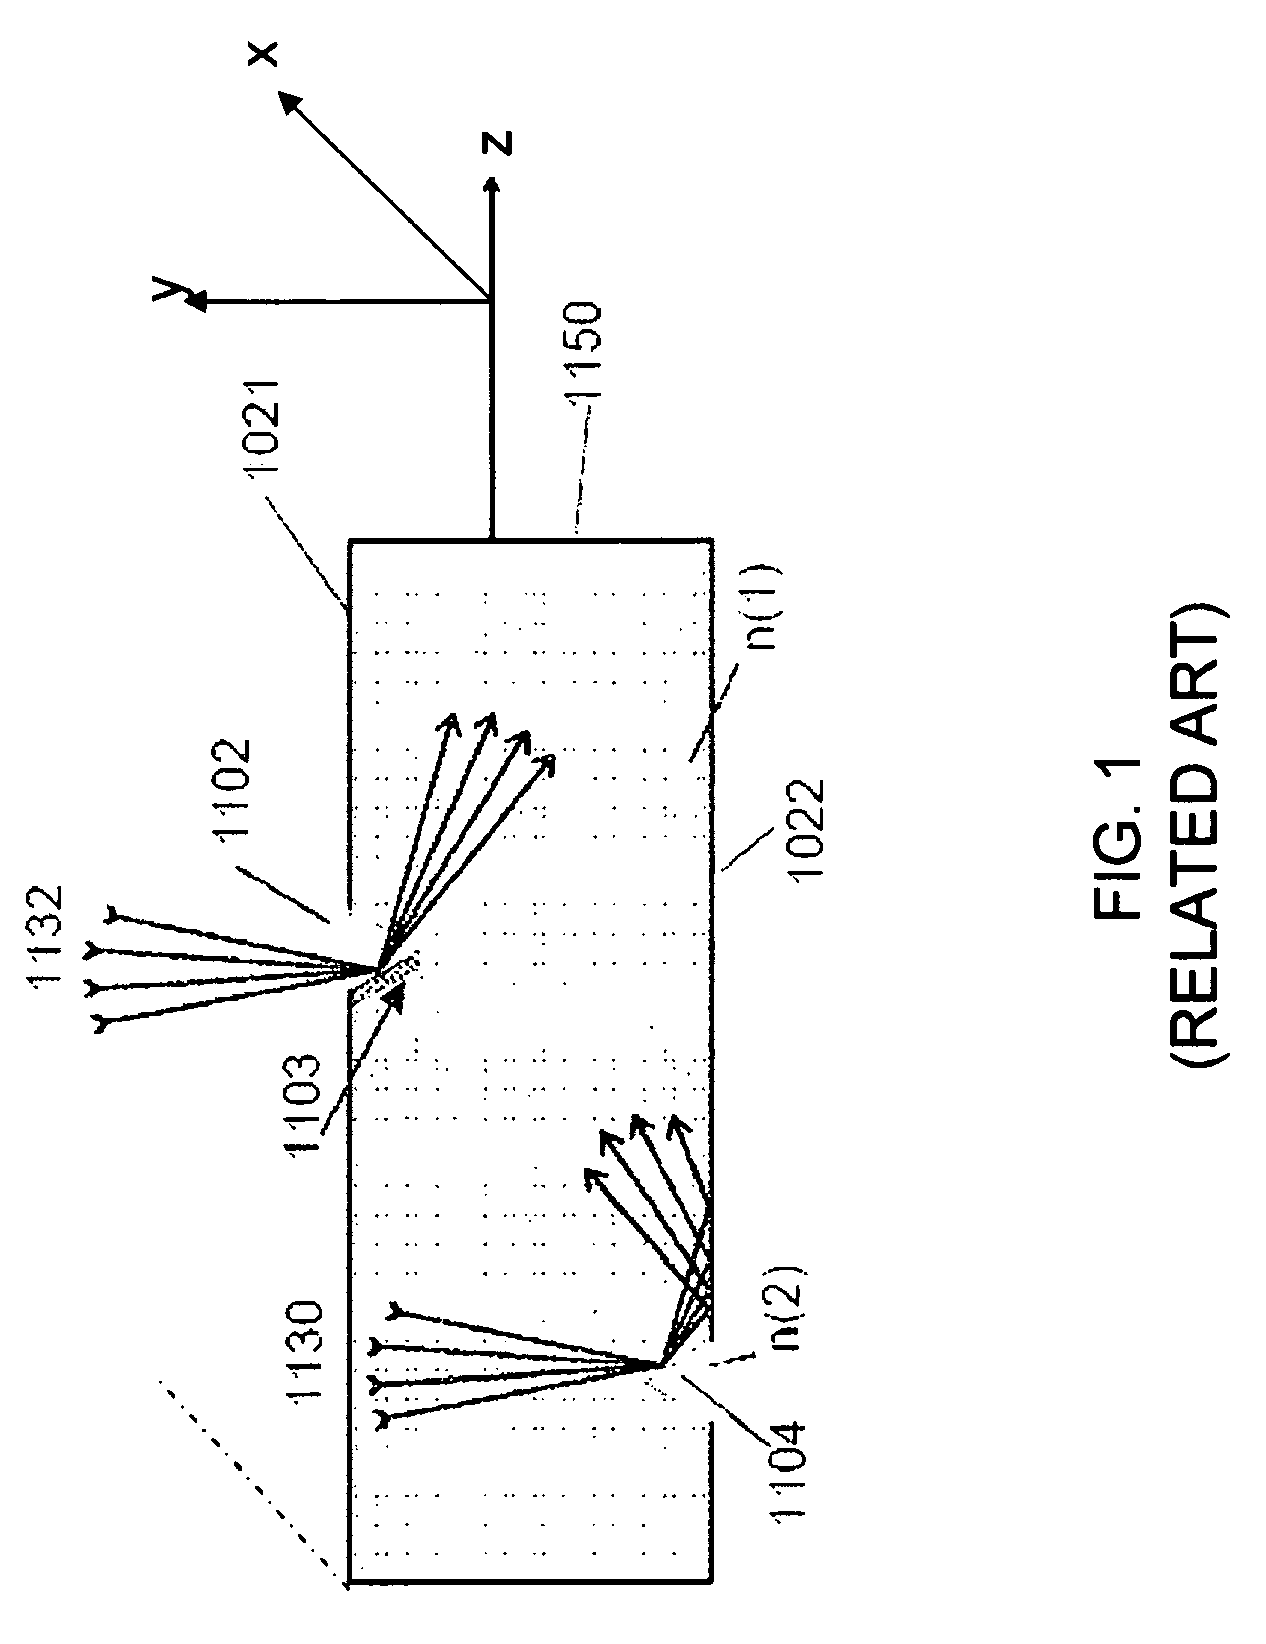 Dimpled light collection and concentration system, components thereof, and methods